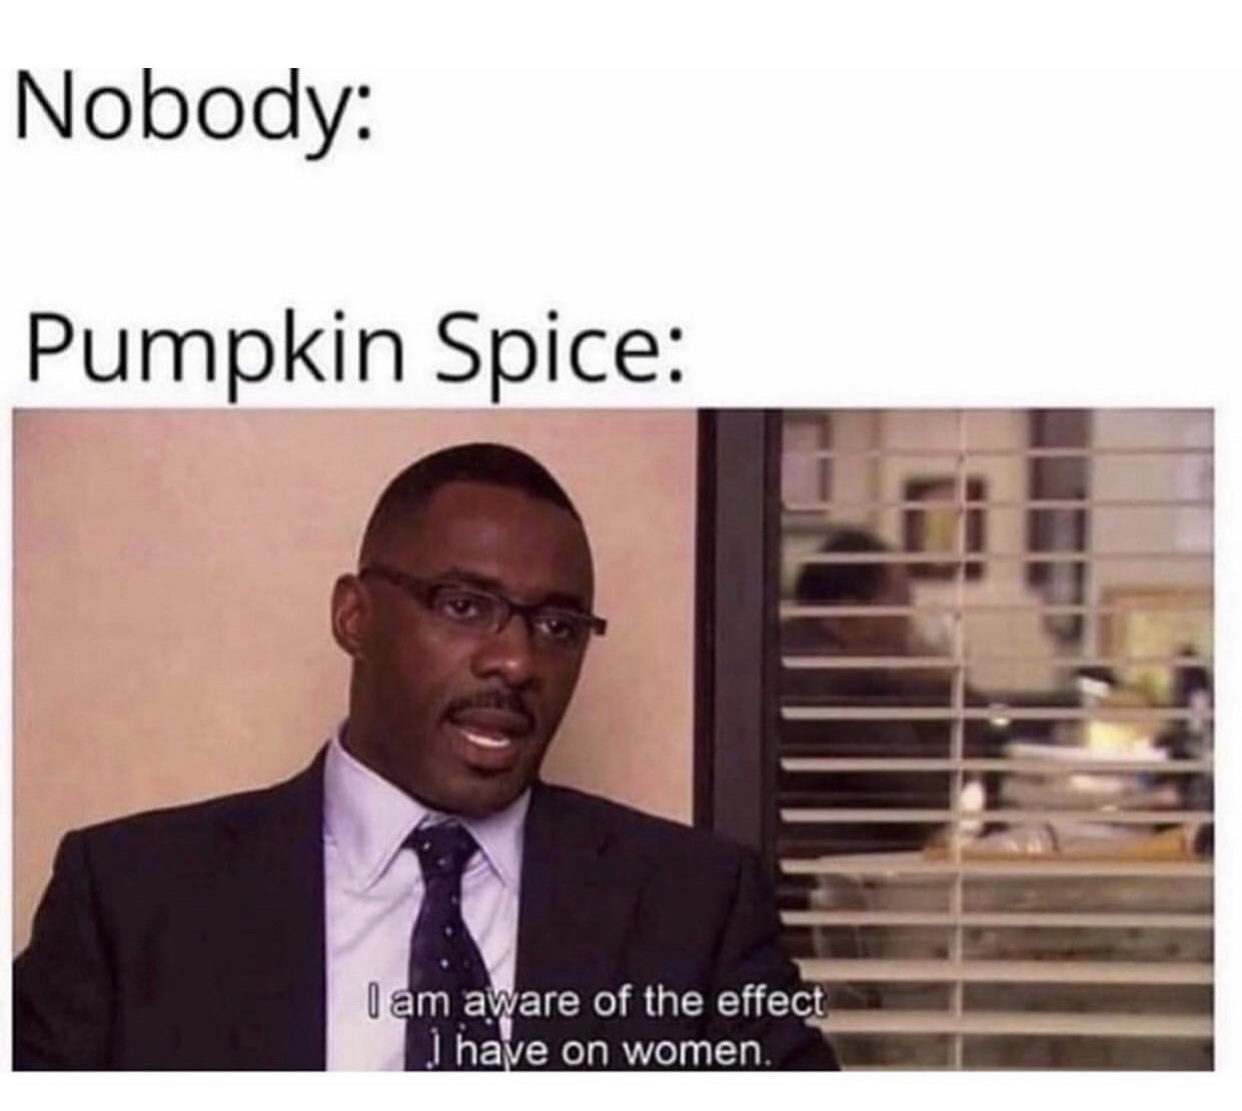 pumpkin spice im aware of the effect - Nobody Pumpkin Spice I am aware of the effect I have on women.